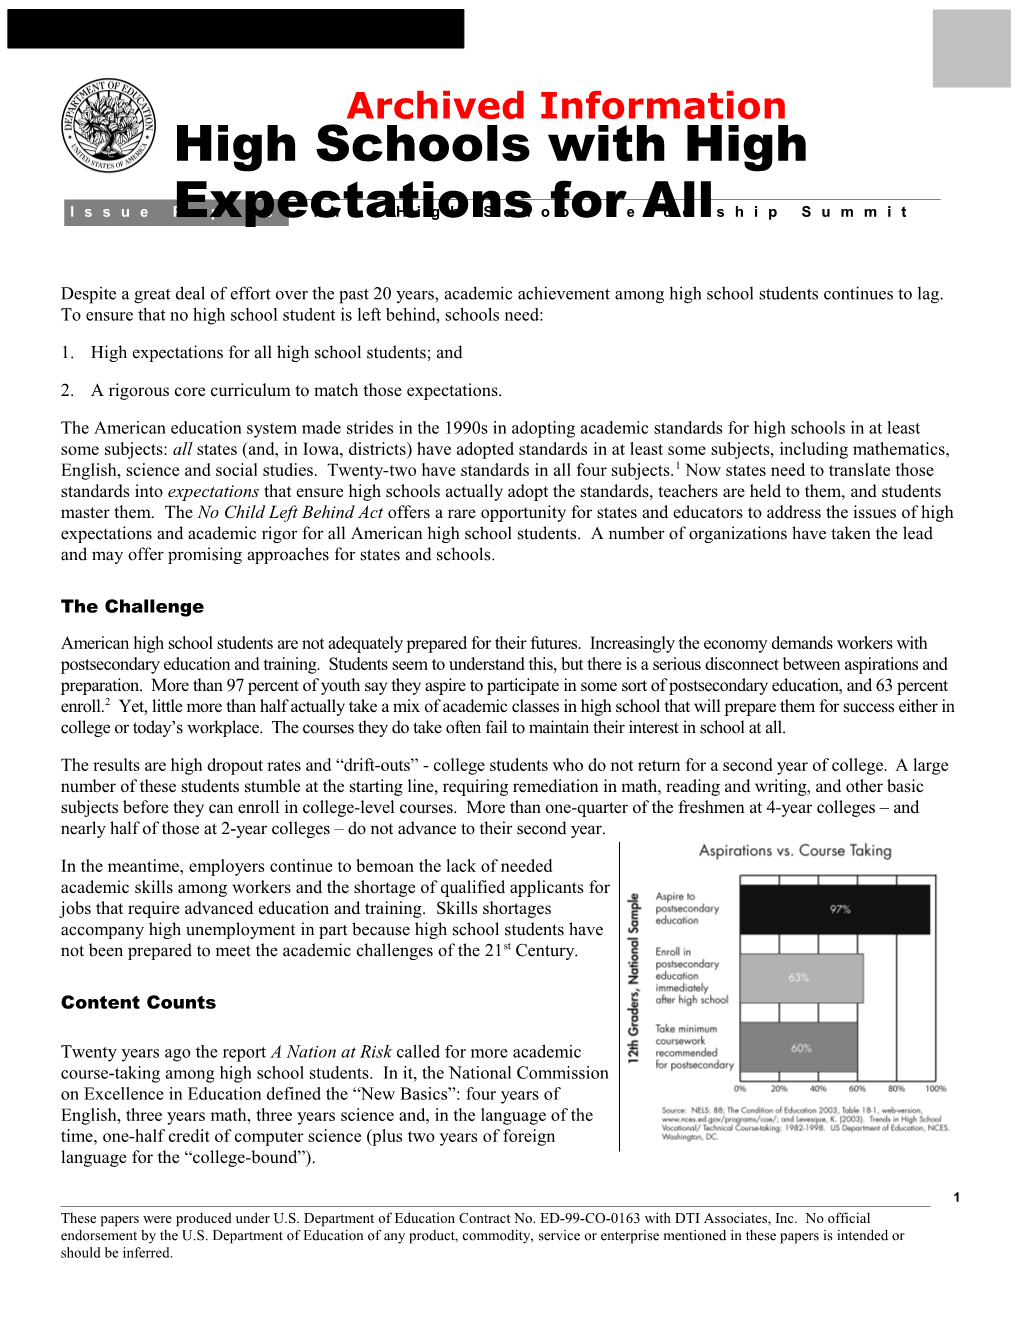 Archived: the High School Leadership Summit Issue Papers: High Schools with High Expectations